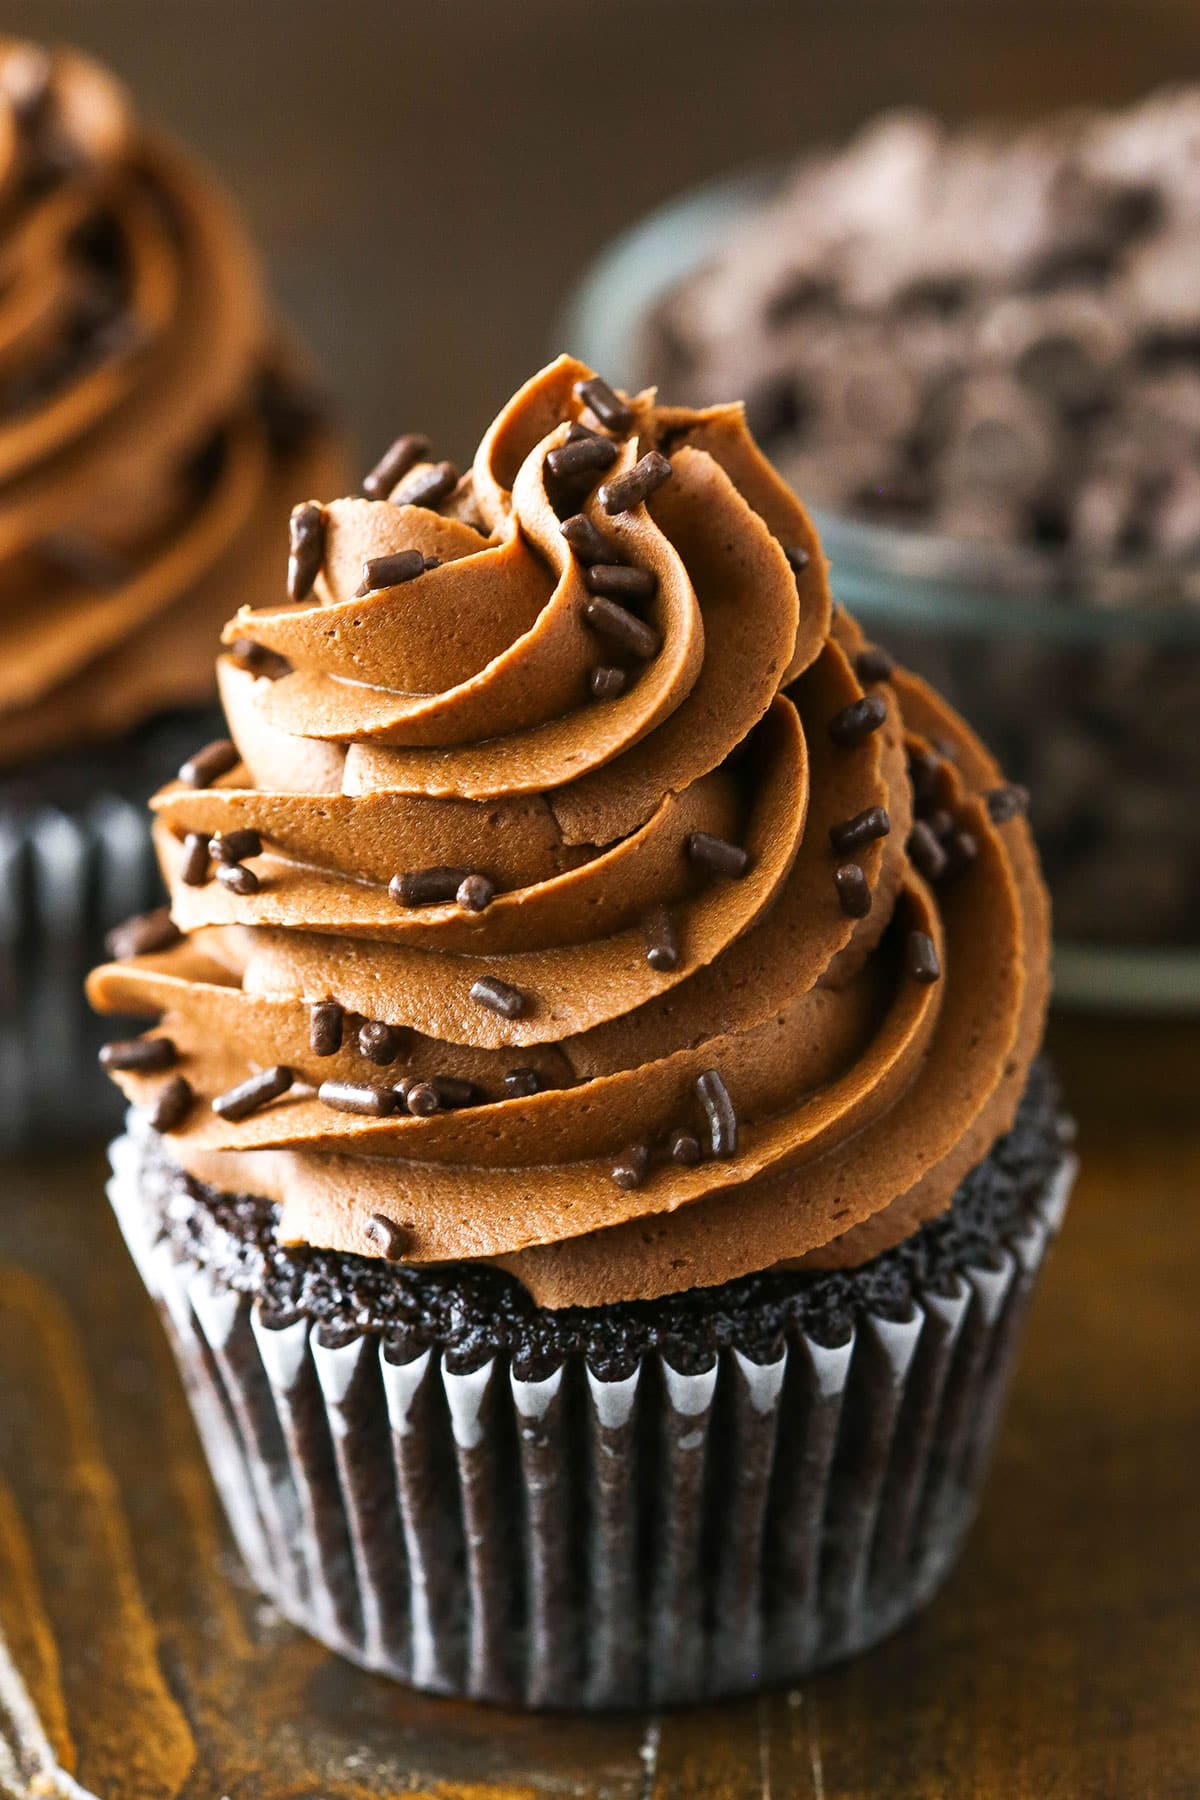 Fudgy Chocolate Buttercream Frosting piped onto a chocolate cupcake